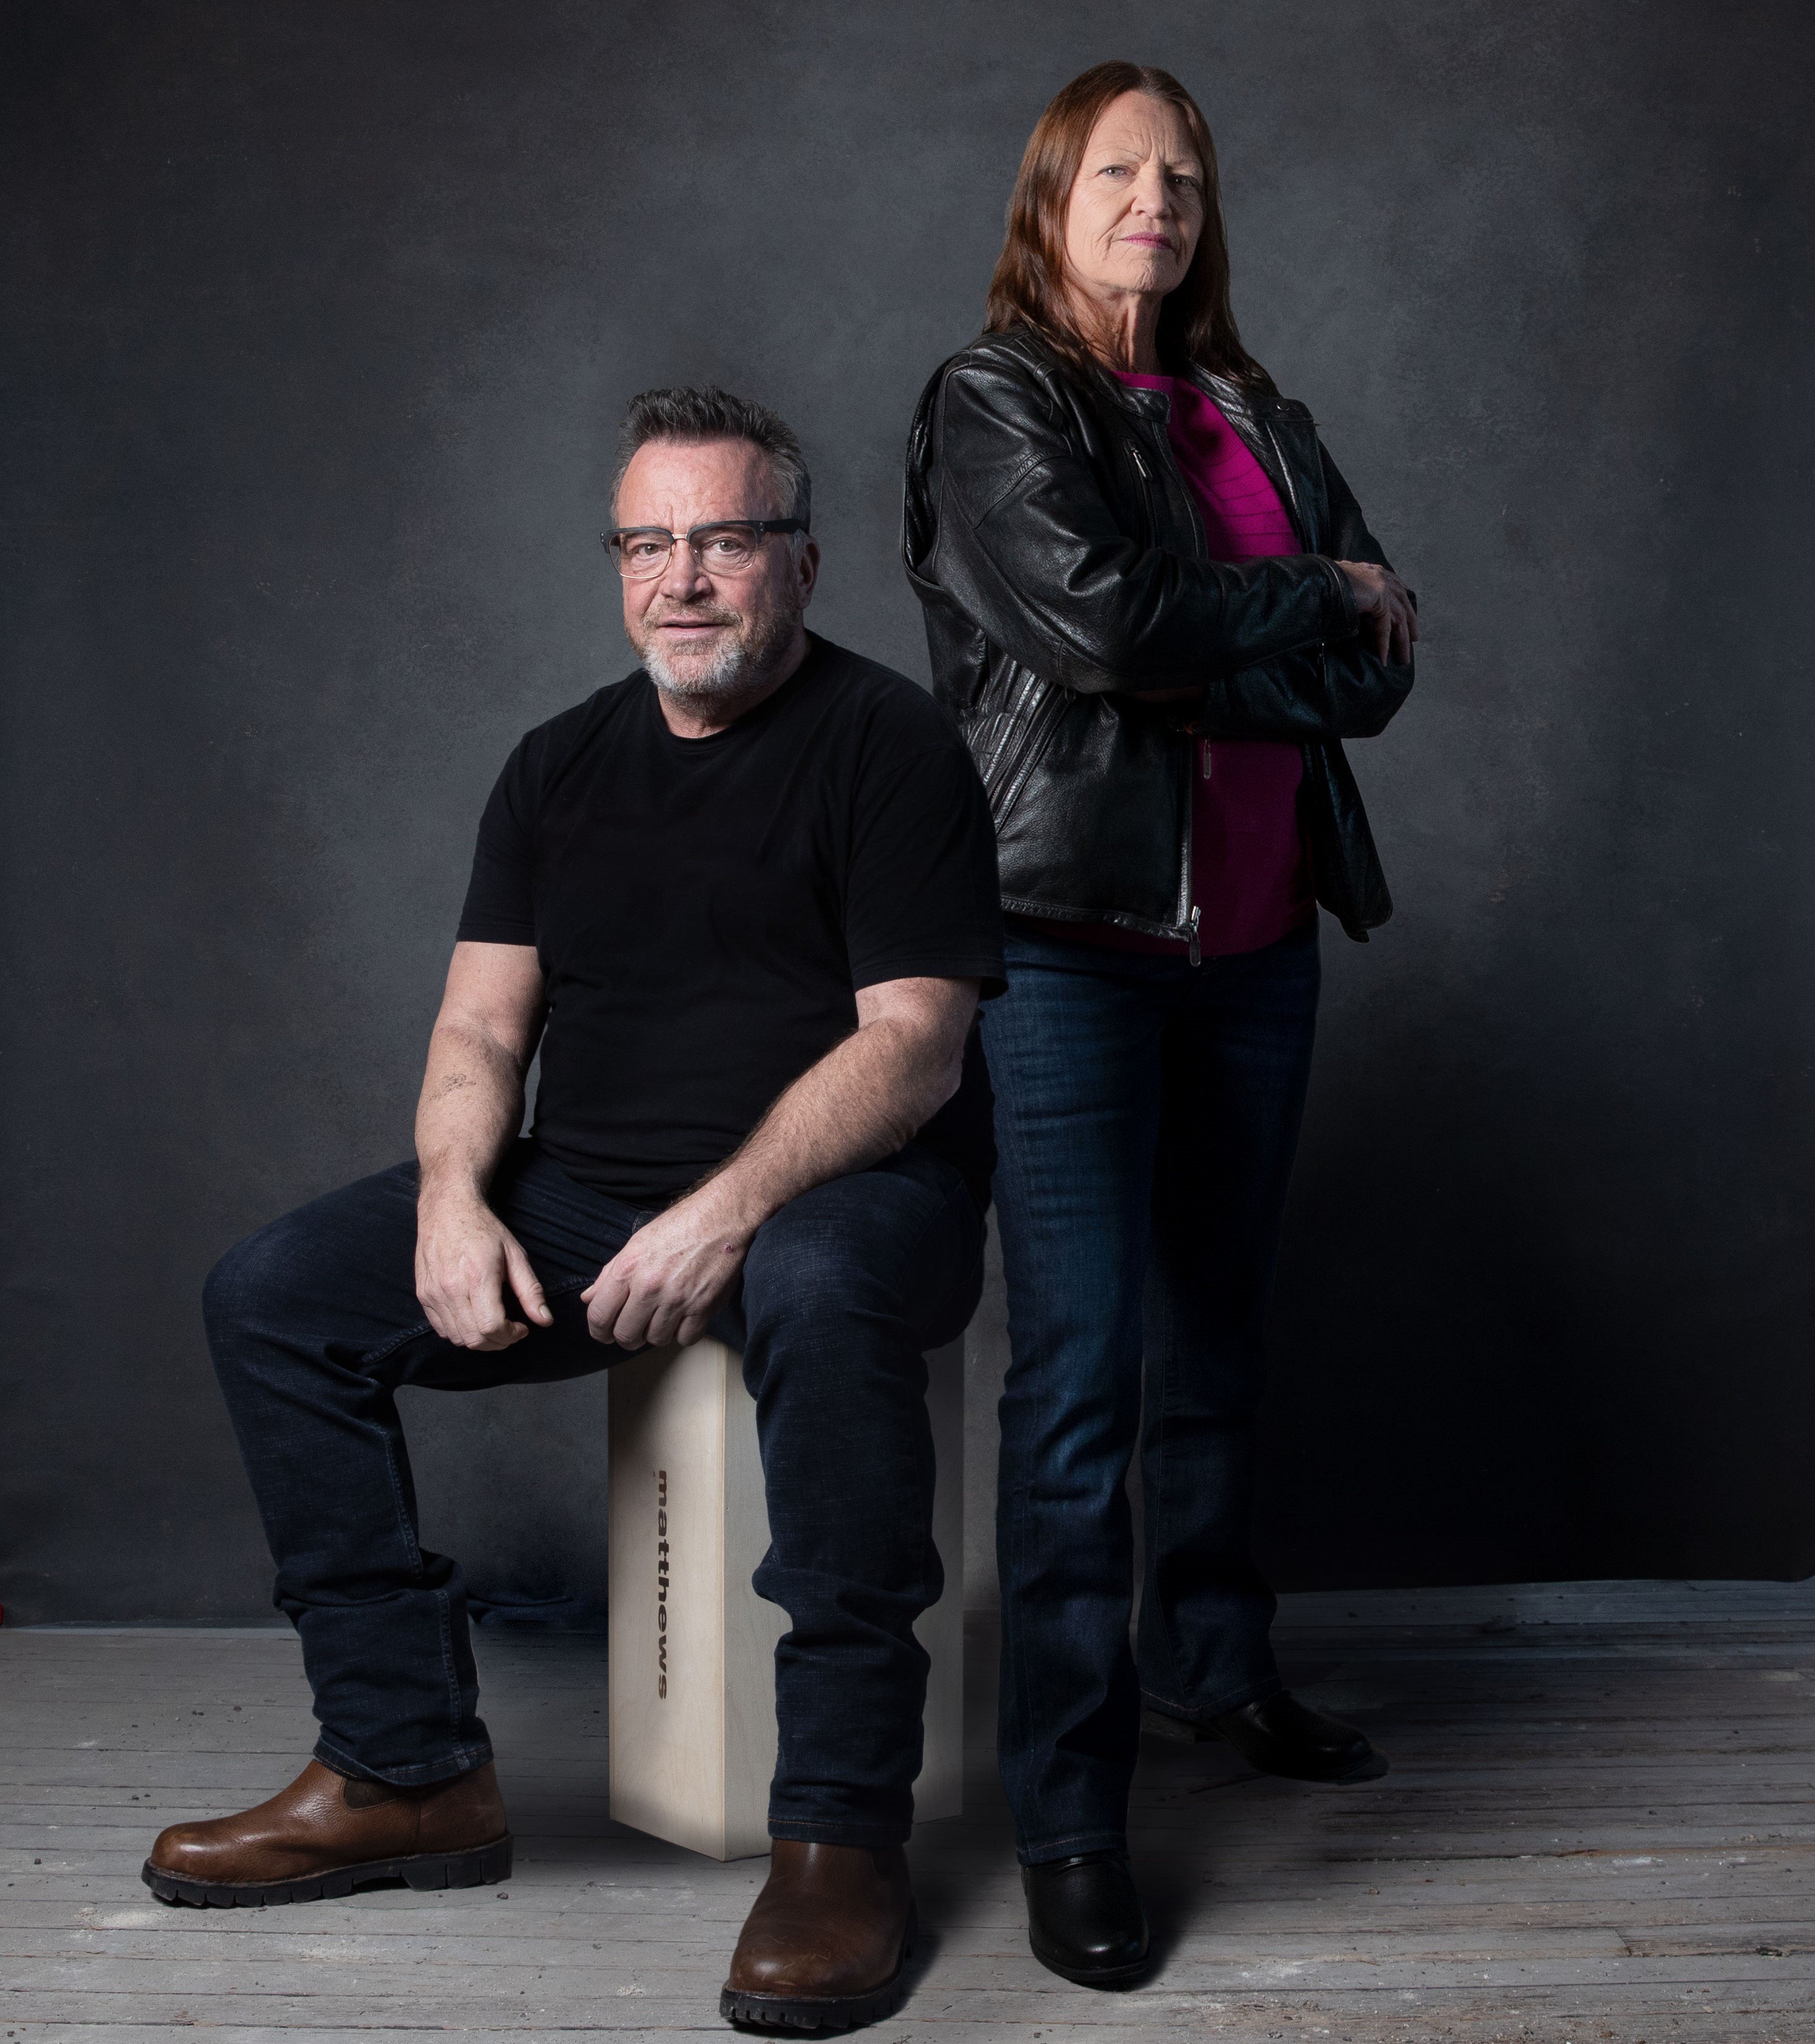 Promotional portrait of Tom Arnold and Lori Arnold for Queen of Meth